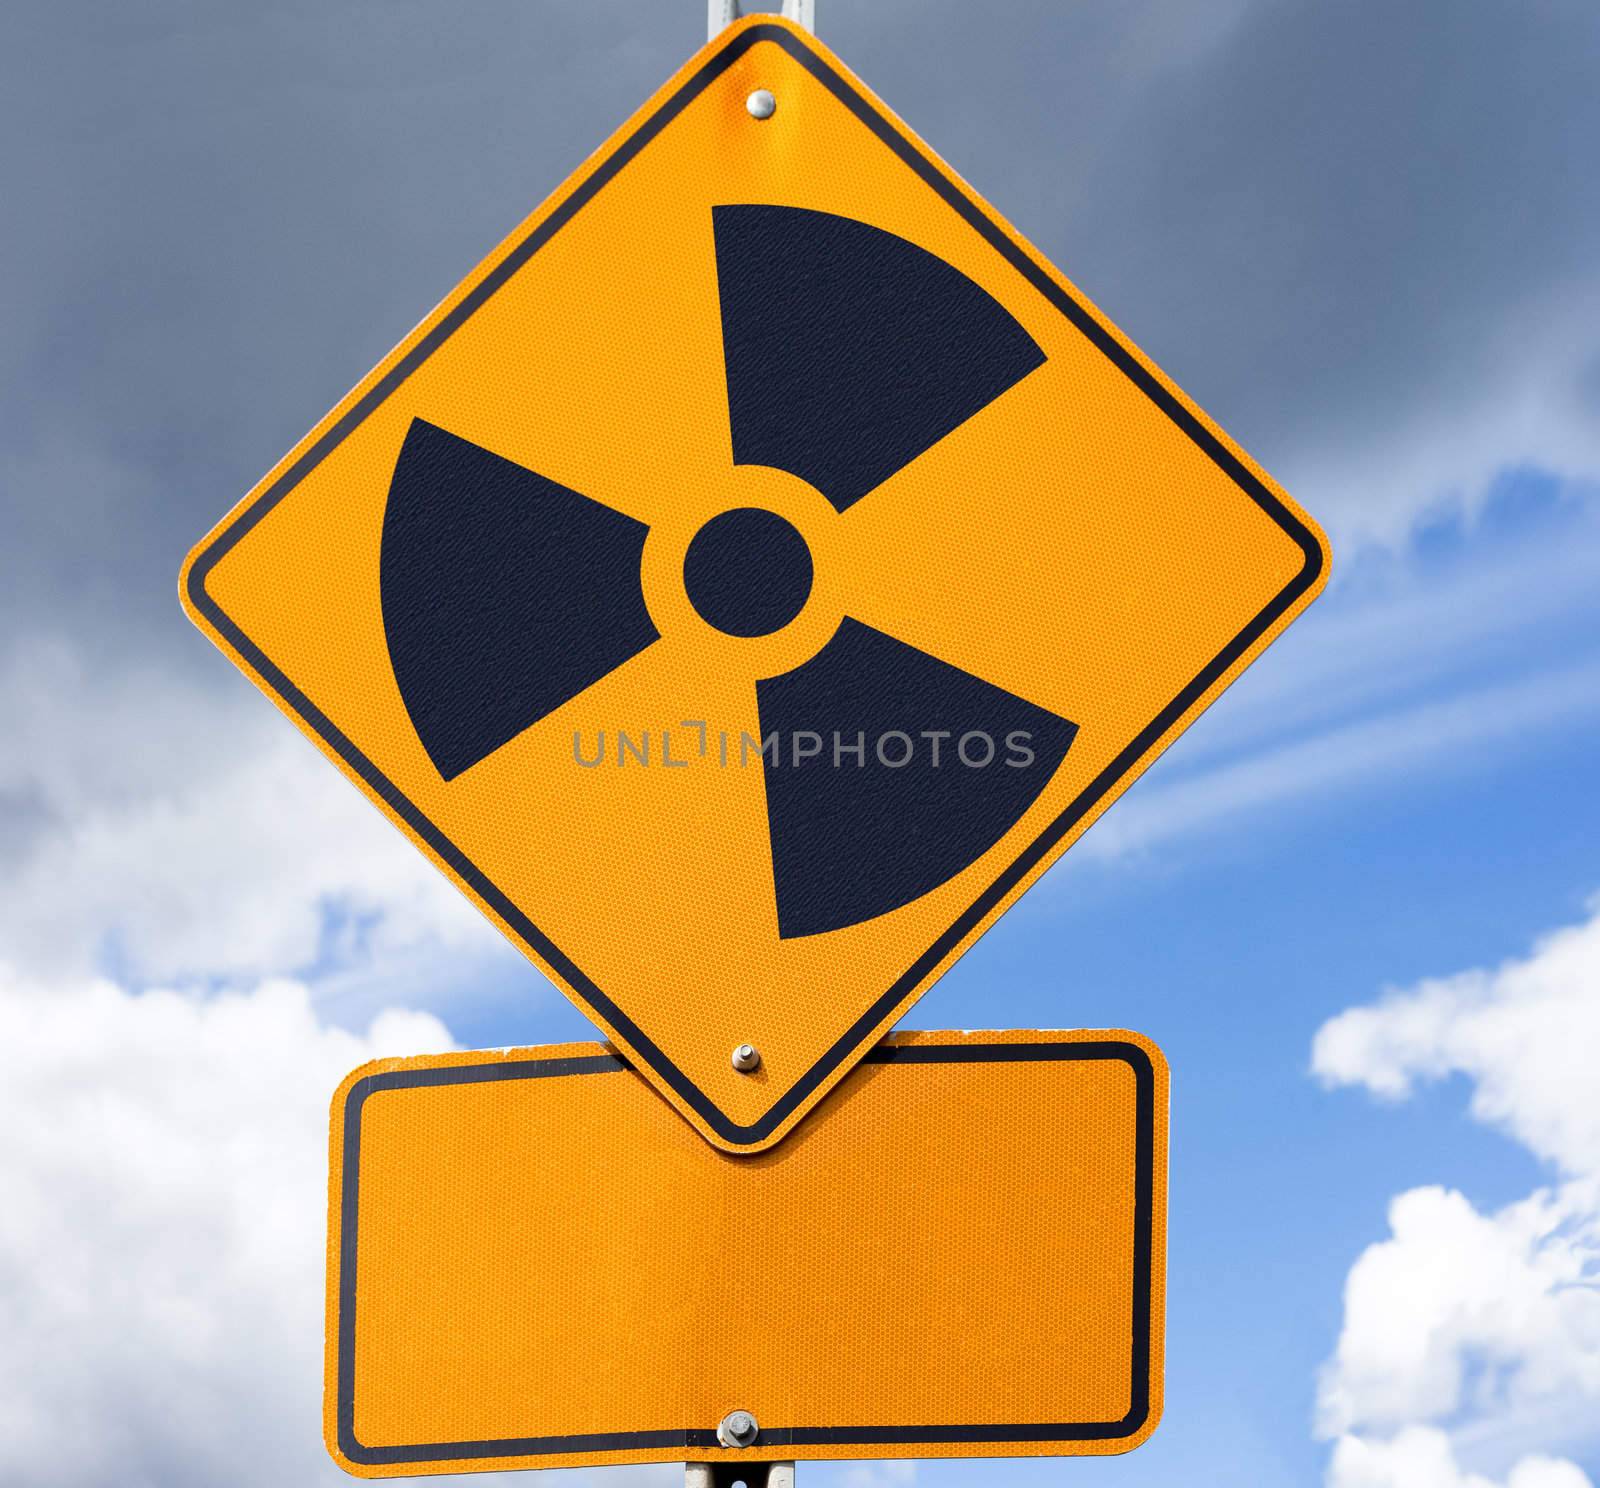 Road sign with radioactivity warning symbol on it and copyspace for your message below.